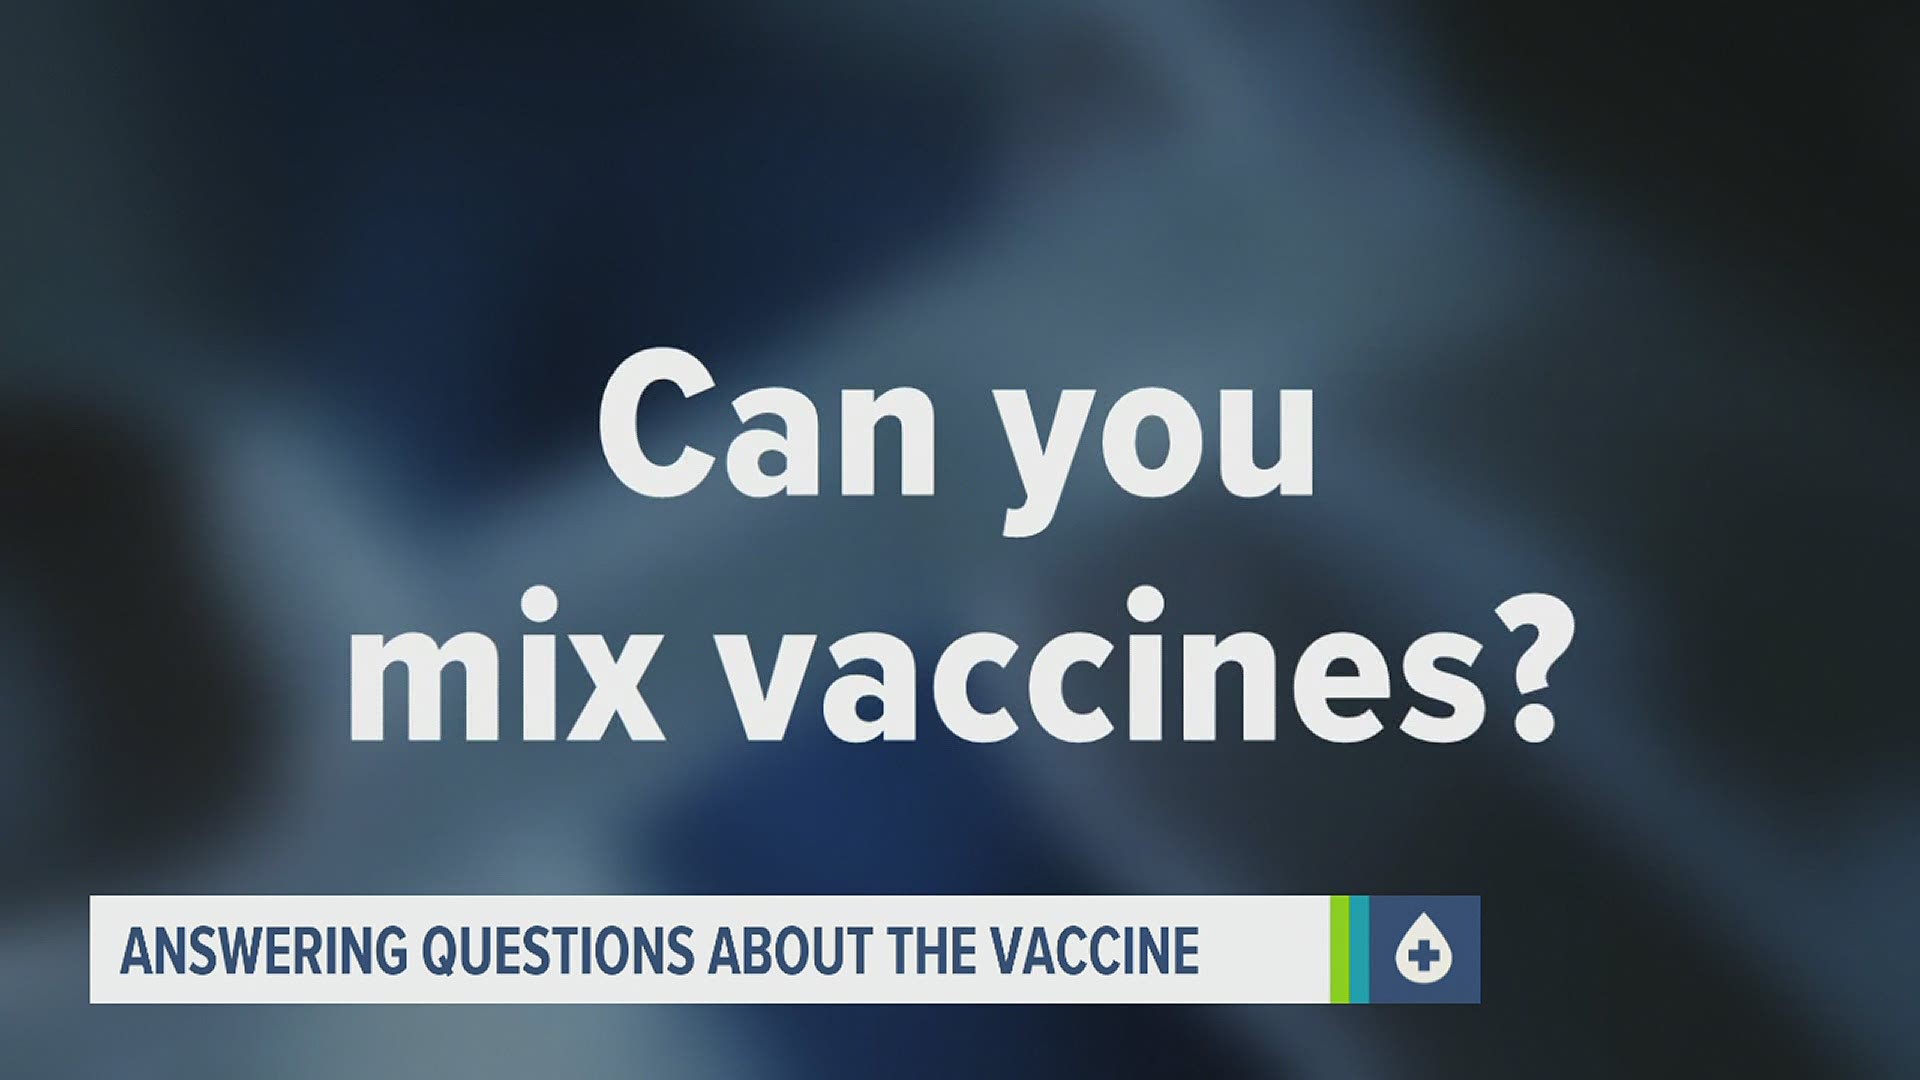 FOX43 took your questions to an infectious disease expert to get answers on the COVID-19 vaccine.